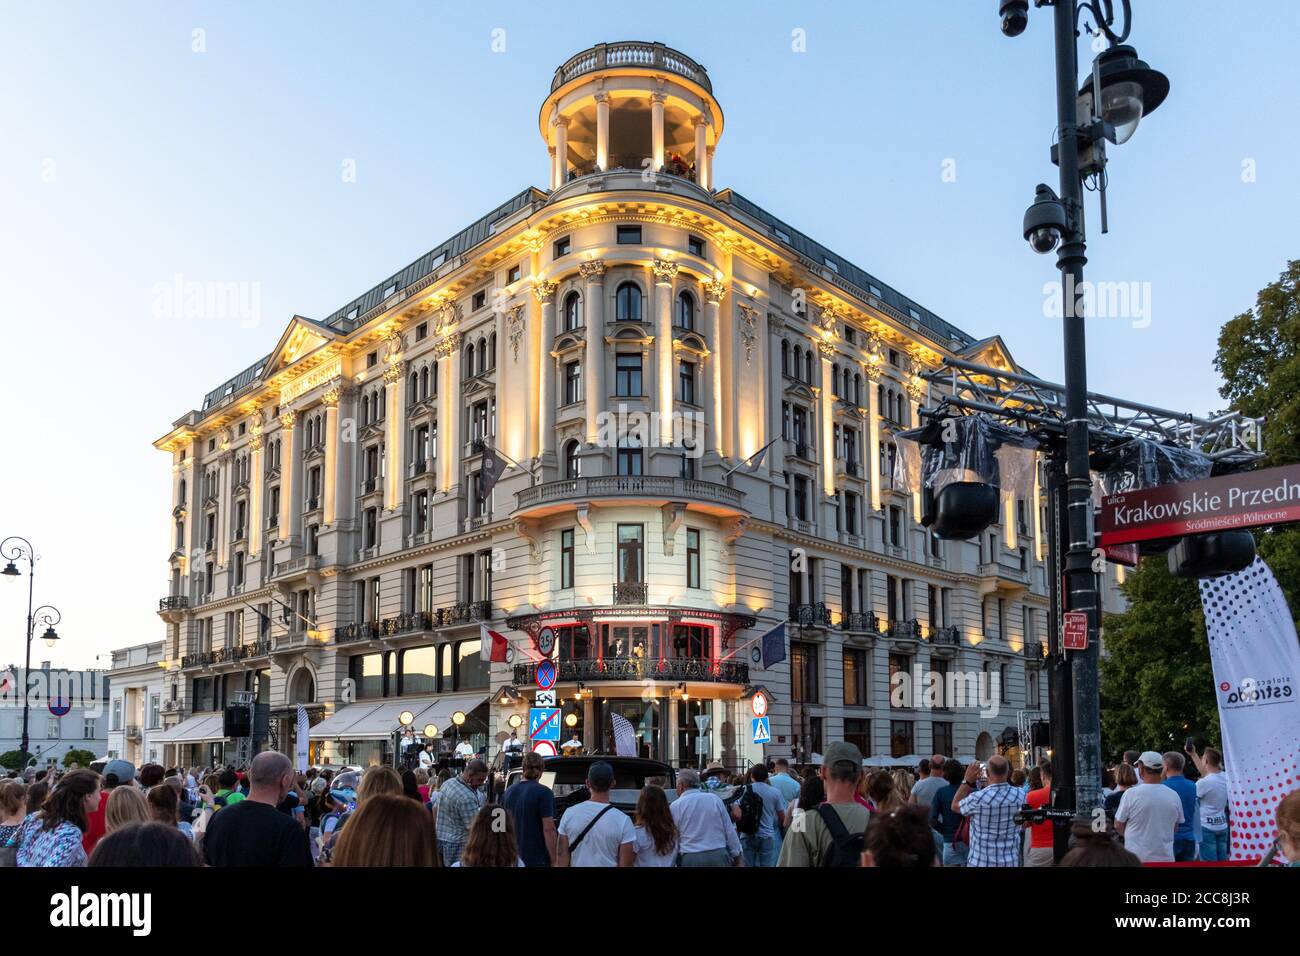 Warsaw, Poland - August 15, 2020: View of the Bristol Hotel. An artistic event takes place in front of the hotel and on one of the balconies. Stock Photo